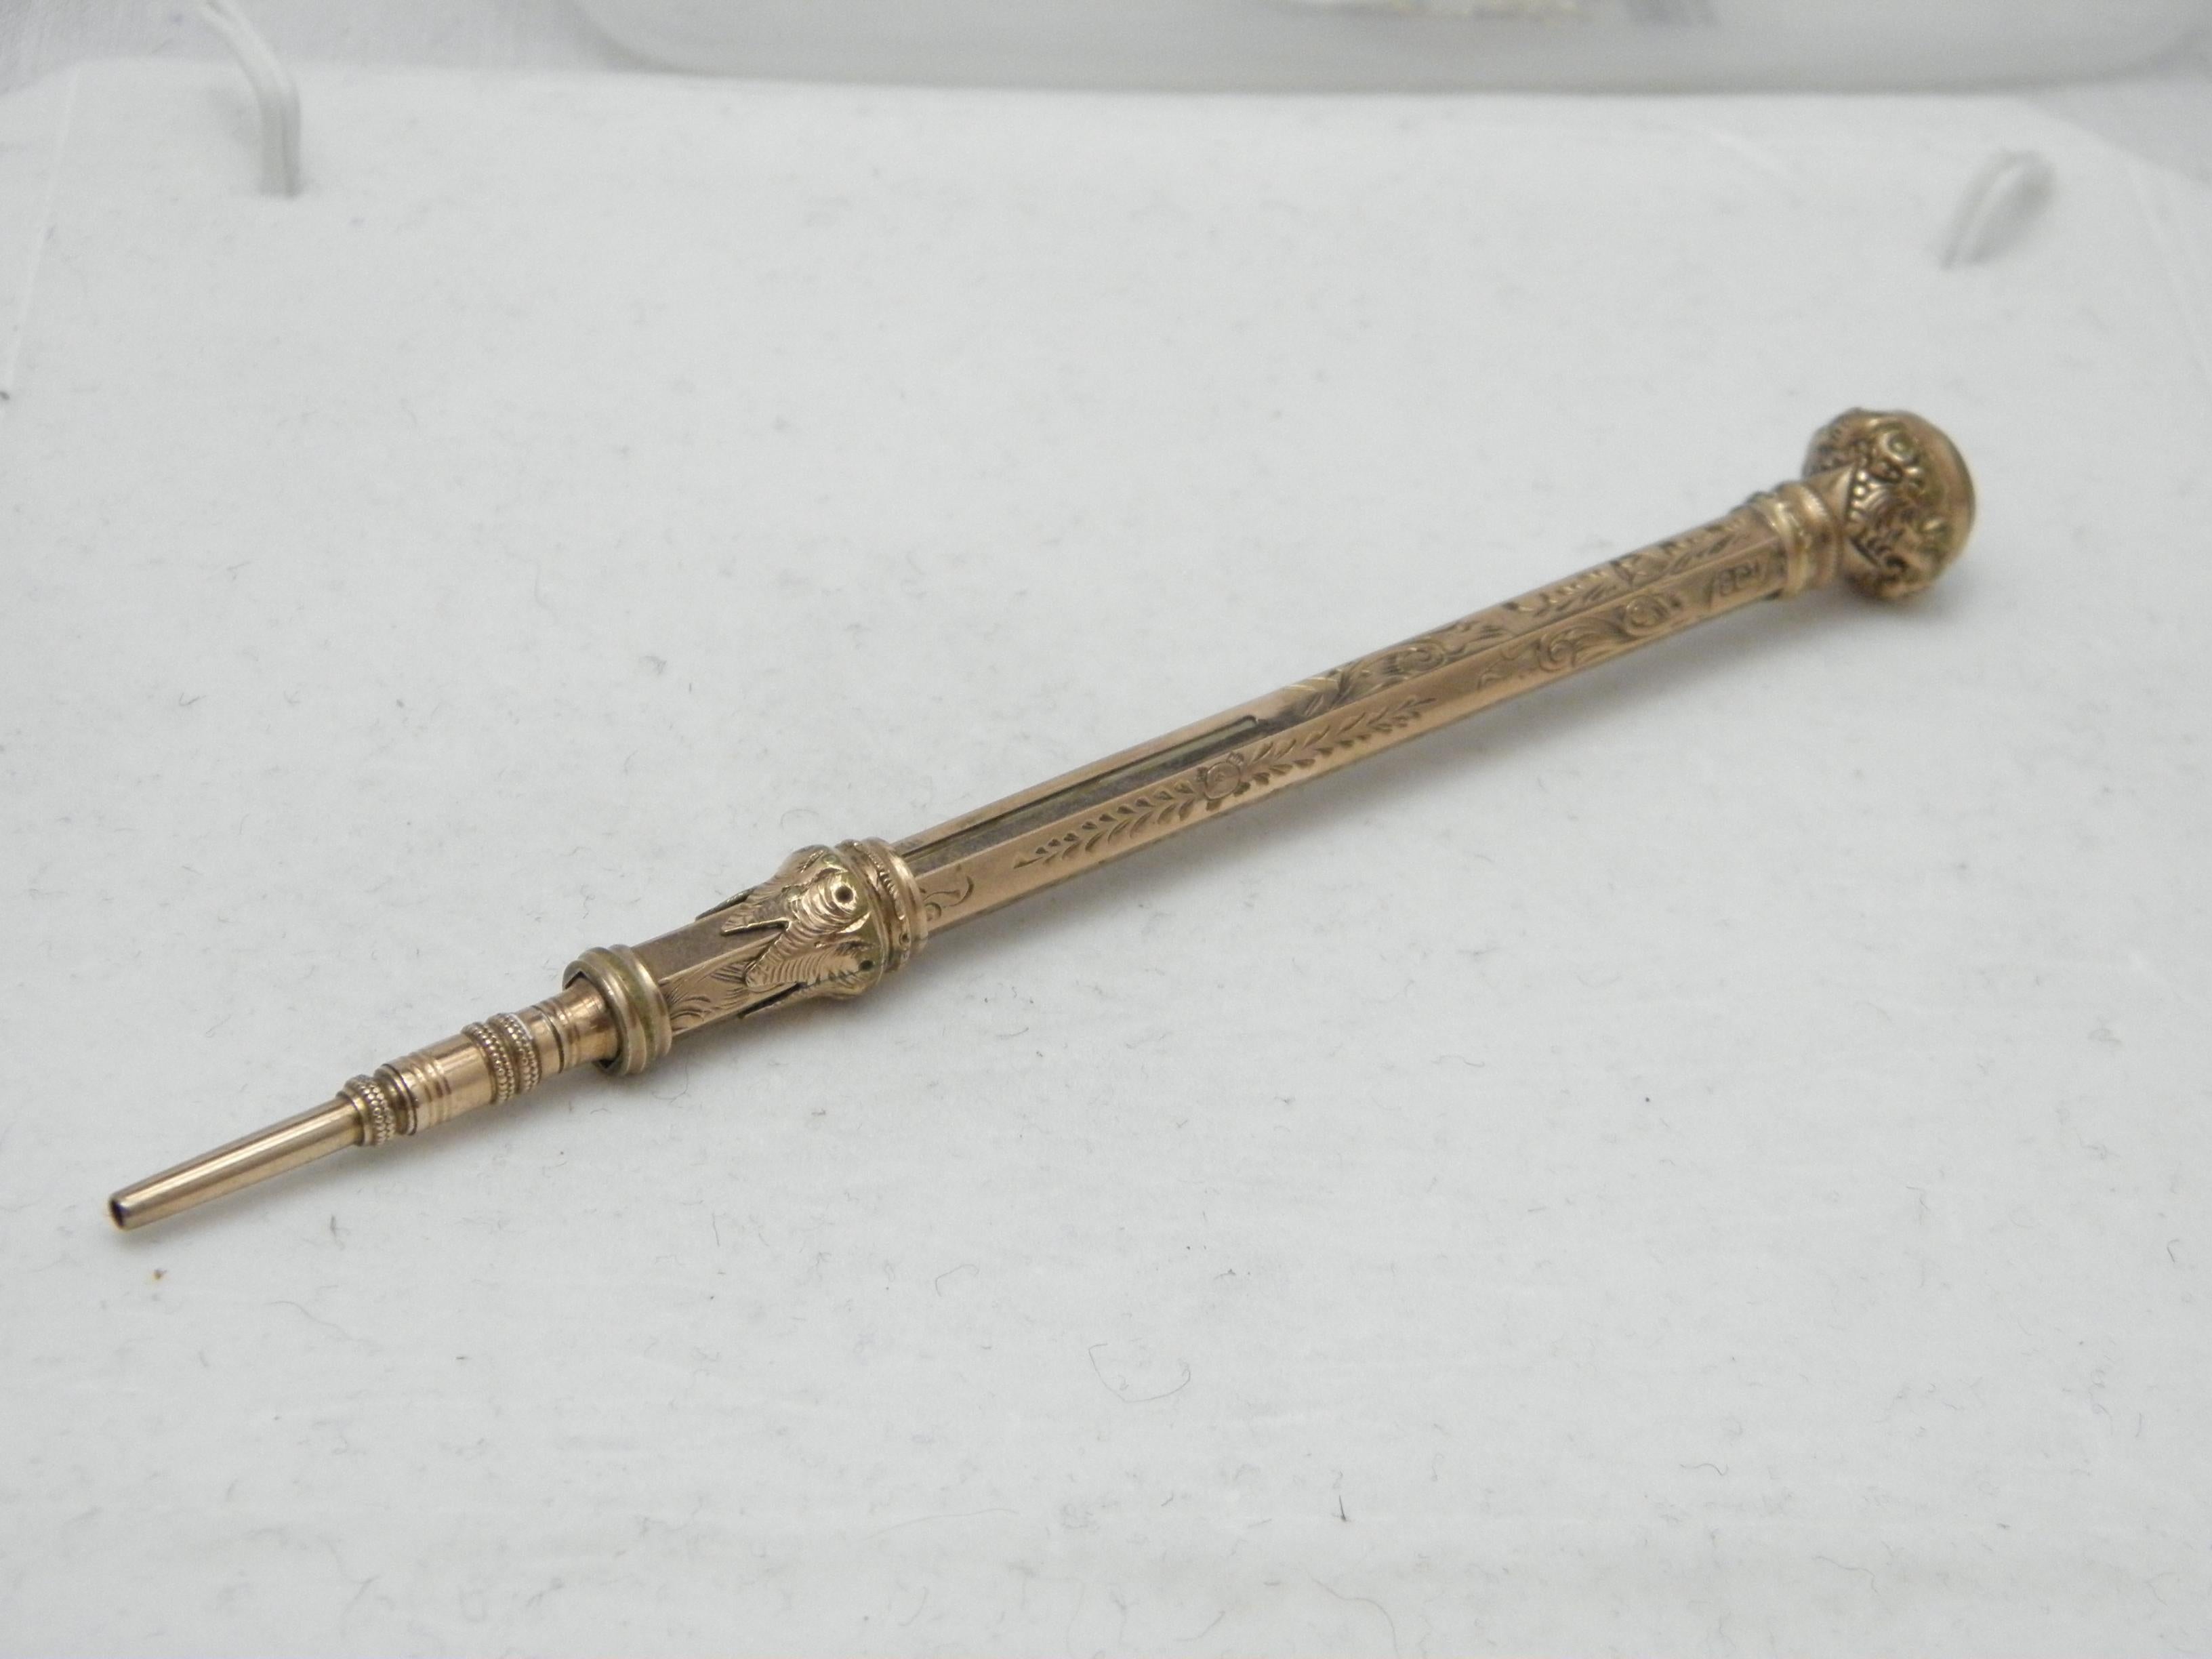 Bargain Antique 9ct Rose Gold Propelling Pencil 1860 375 Purity Huge Heavy 14.4g For Sale 2